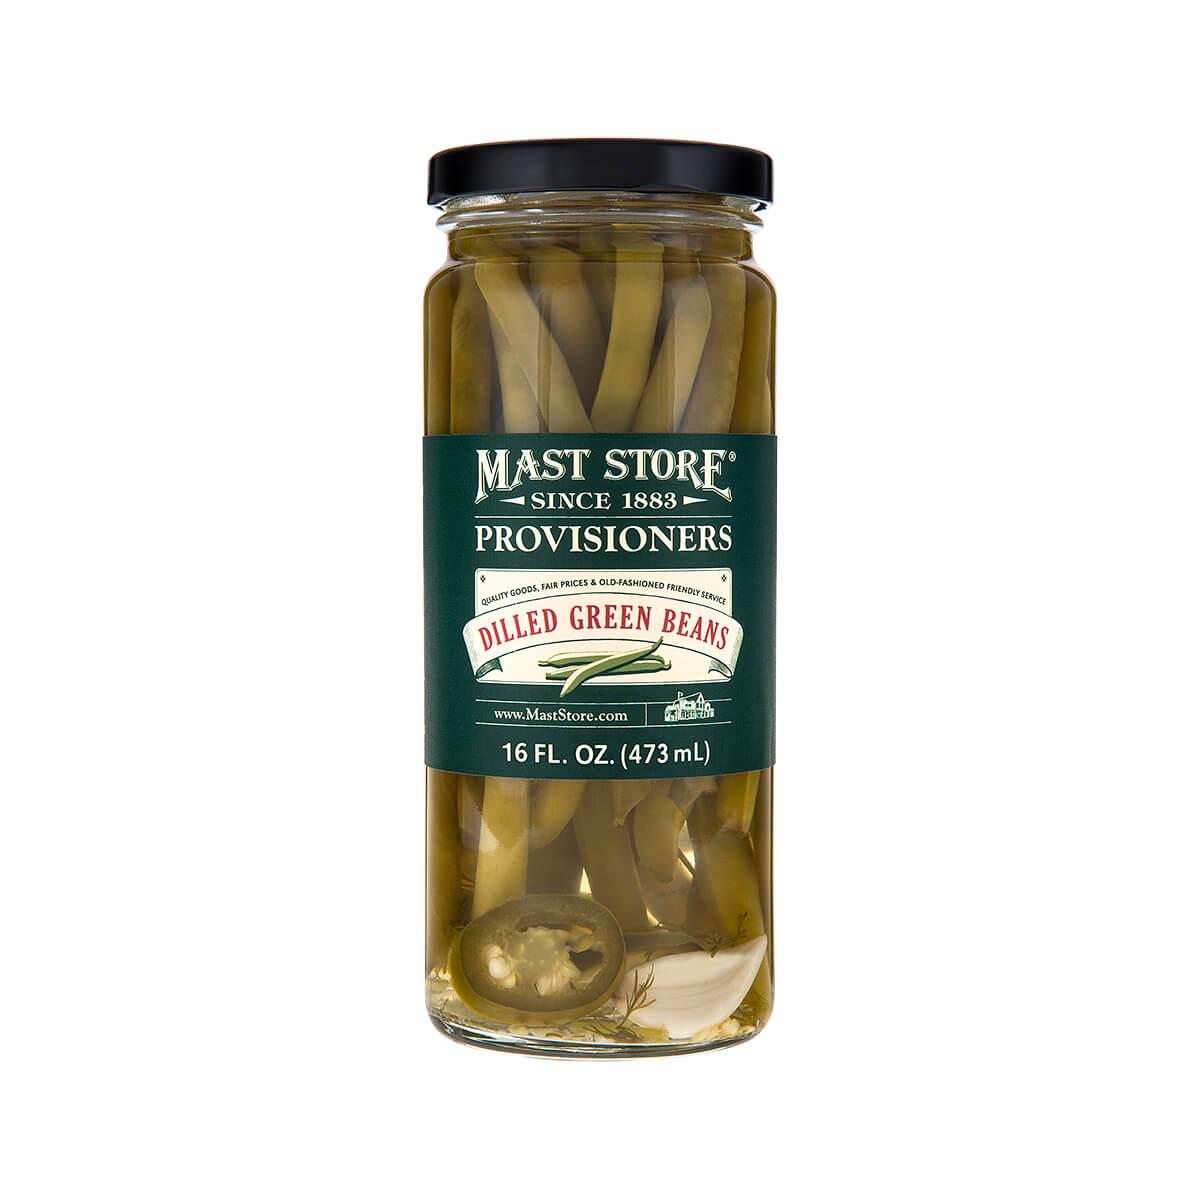  Mast Store Provisioners Dilled Green Beans